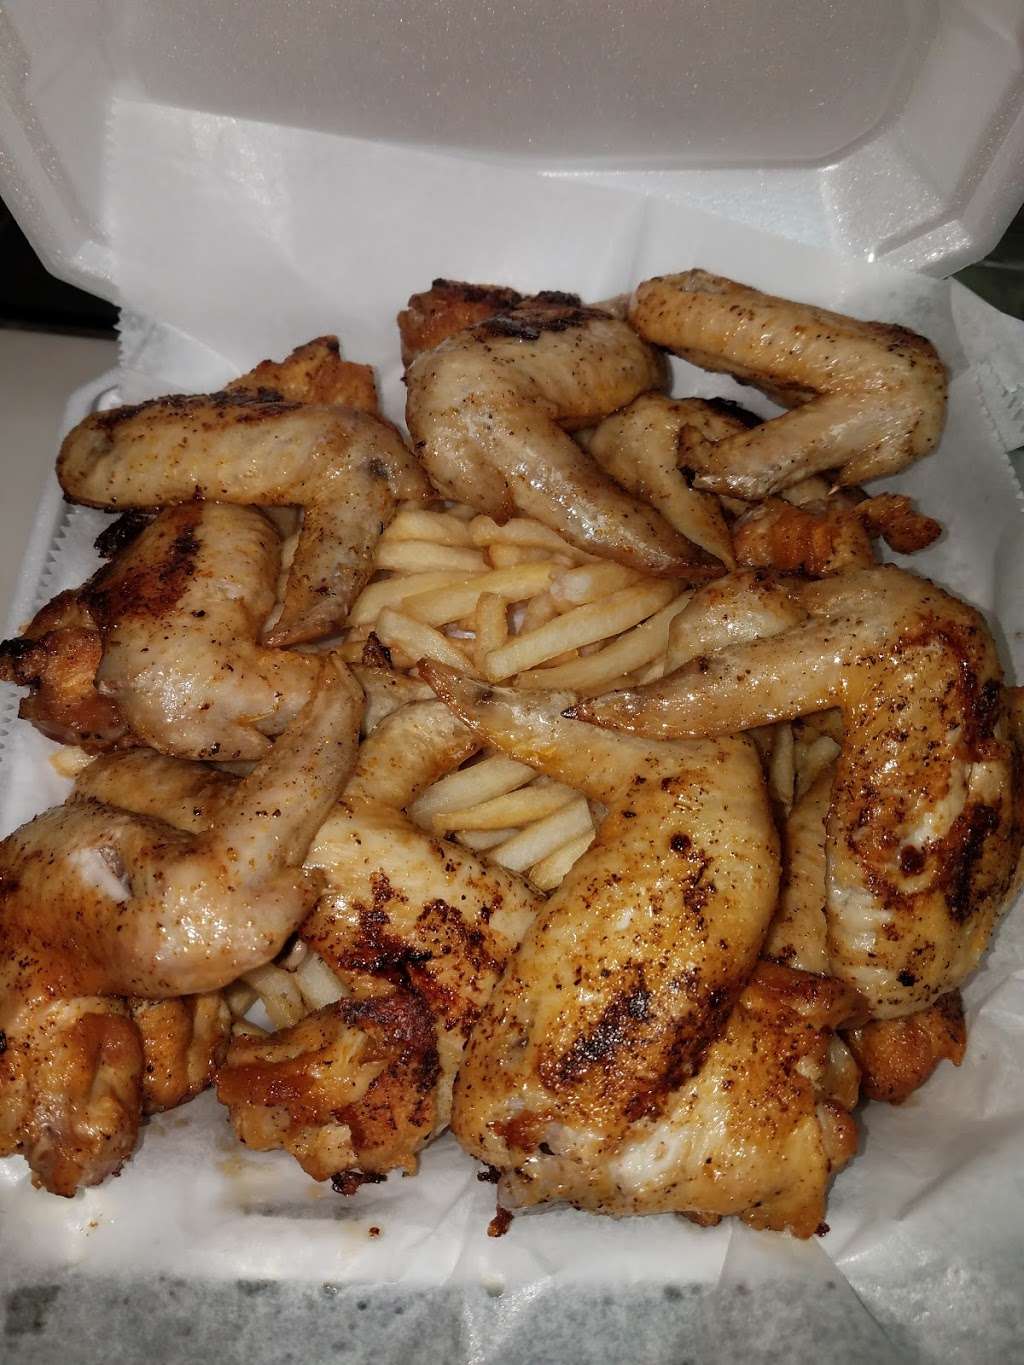 Rays Fish Chicken and Grill | 7901 S Damen Ave, Chicago, IL 60620 | Phone: (773) 846-7189